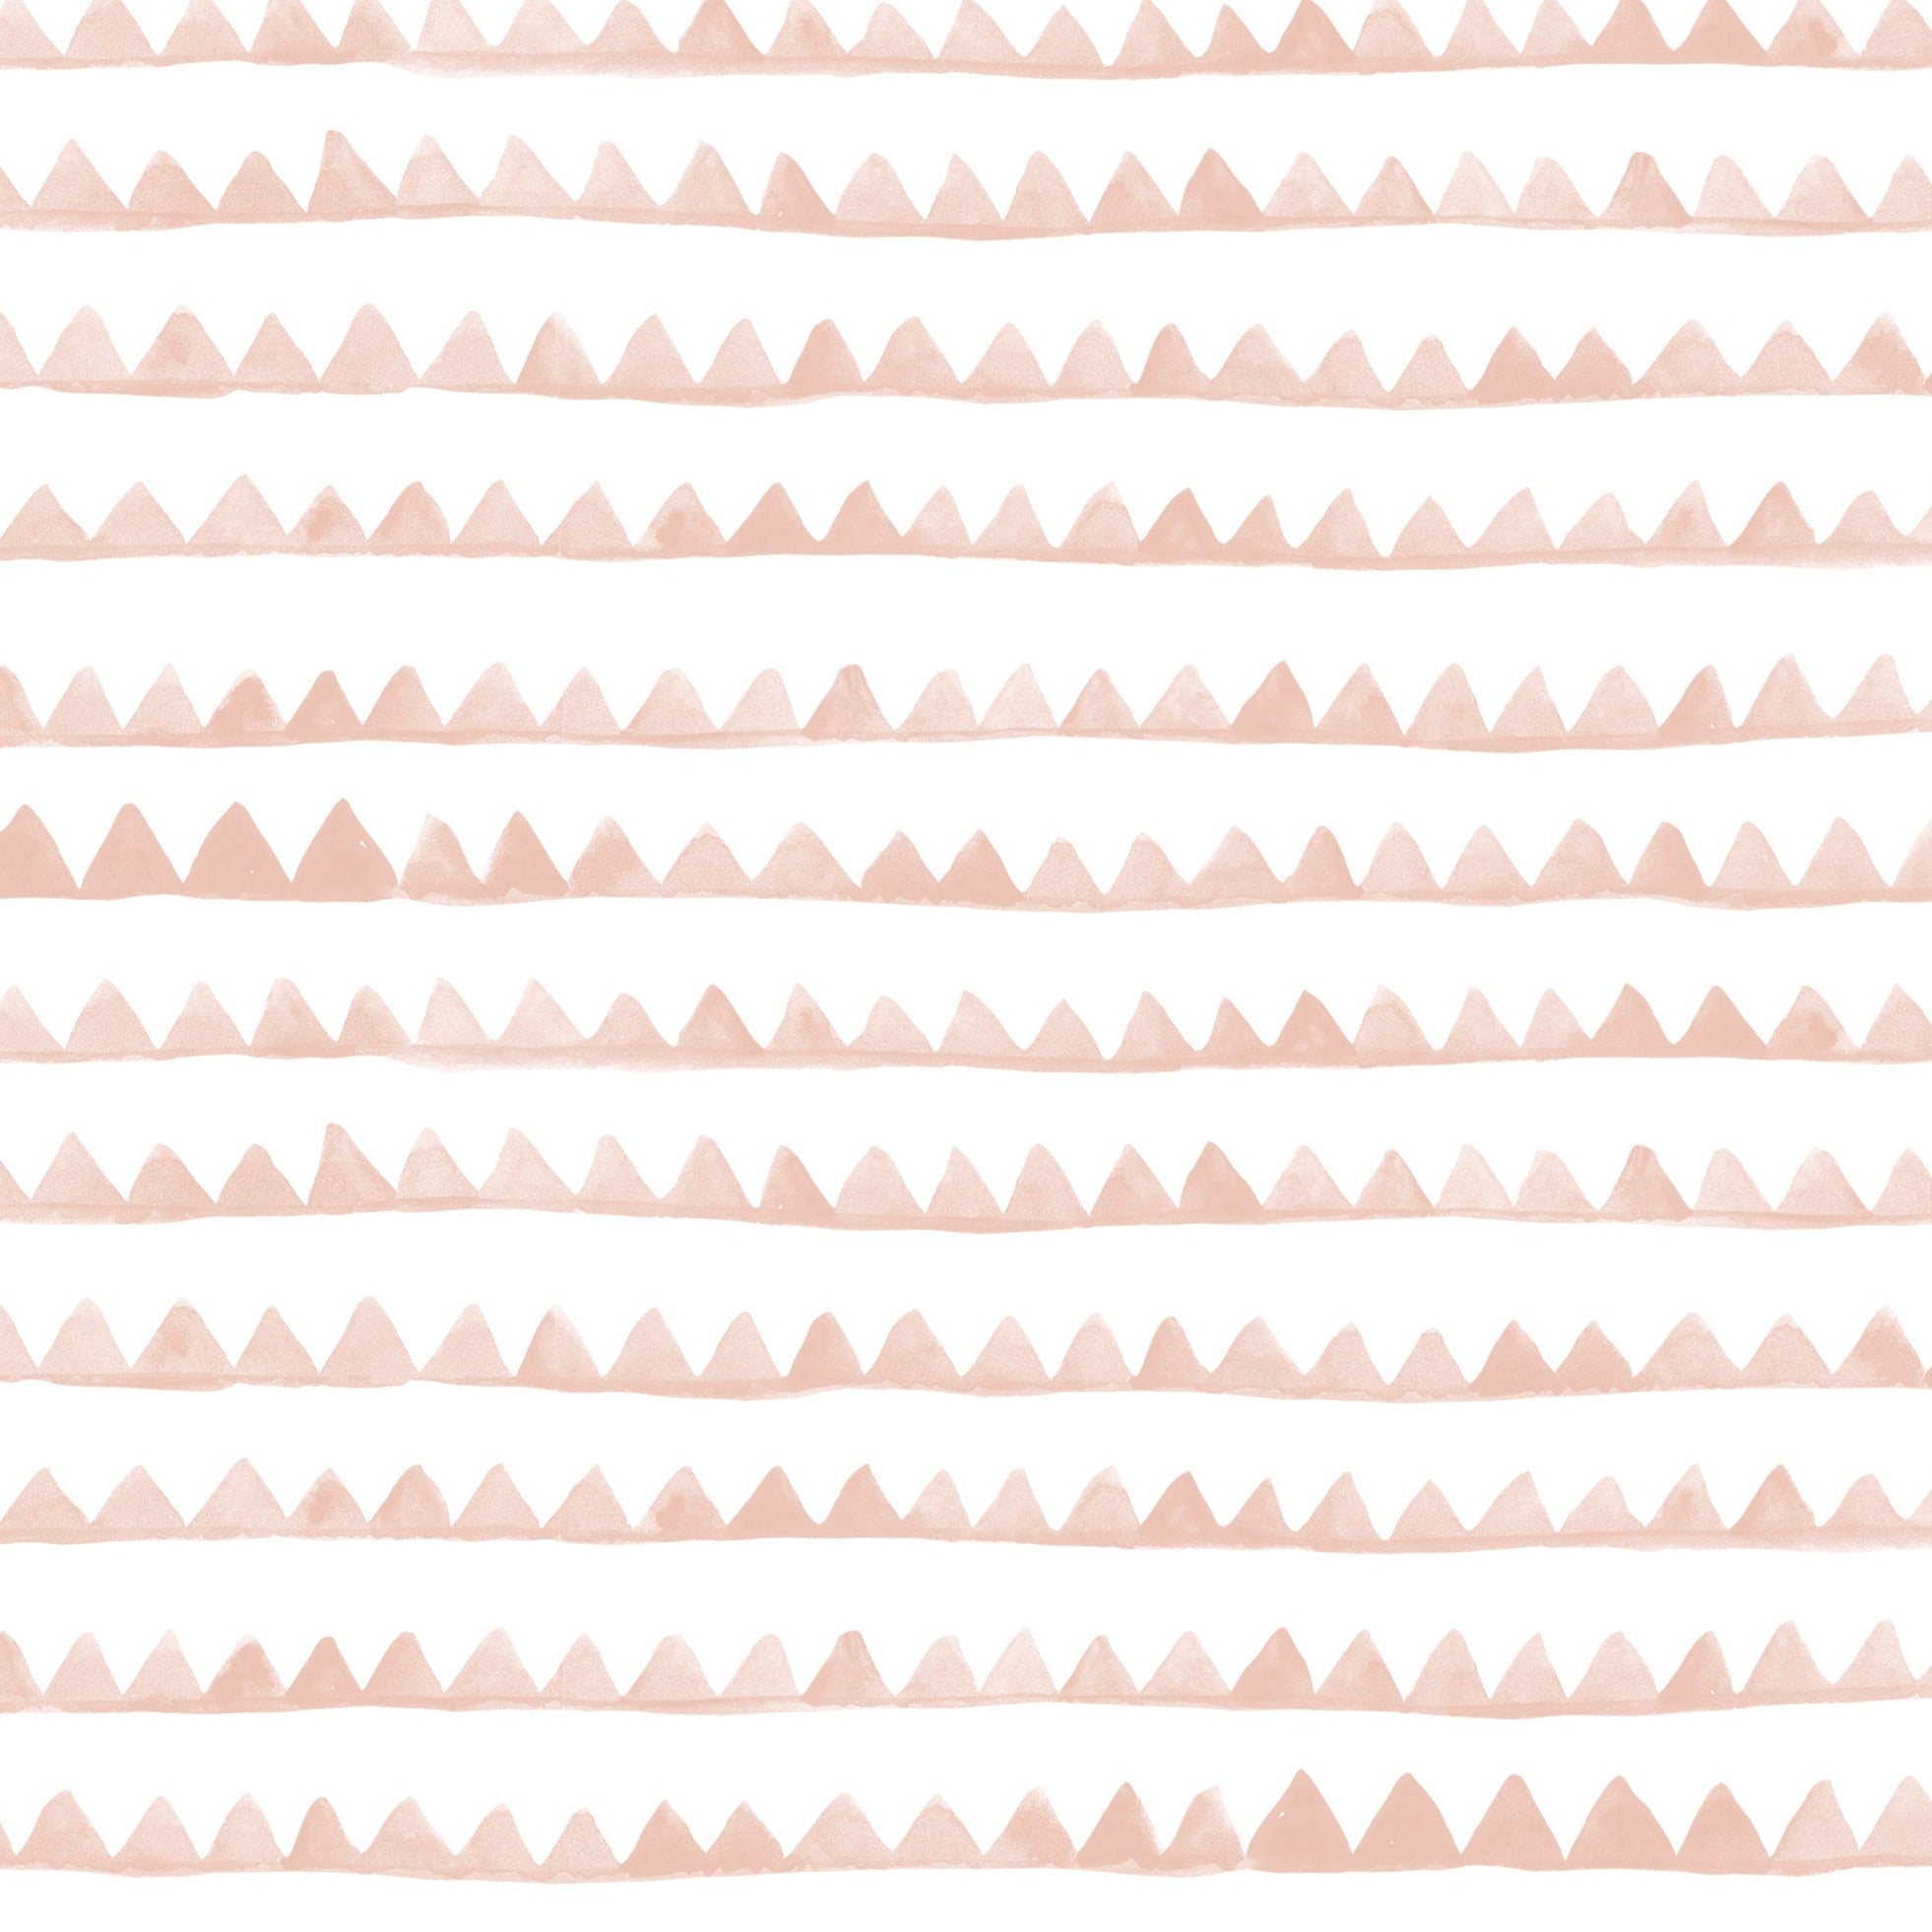 Seamless pattern of muted terracotta zigzags alternating in rows on a clean white background. The minimalist geometric design is stylized yet playful, making it well-suited for children's rooms or creative spaces.